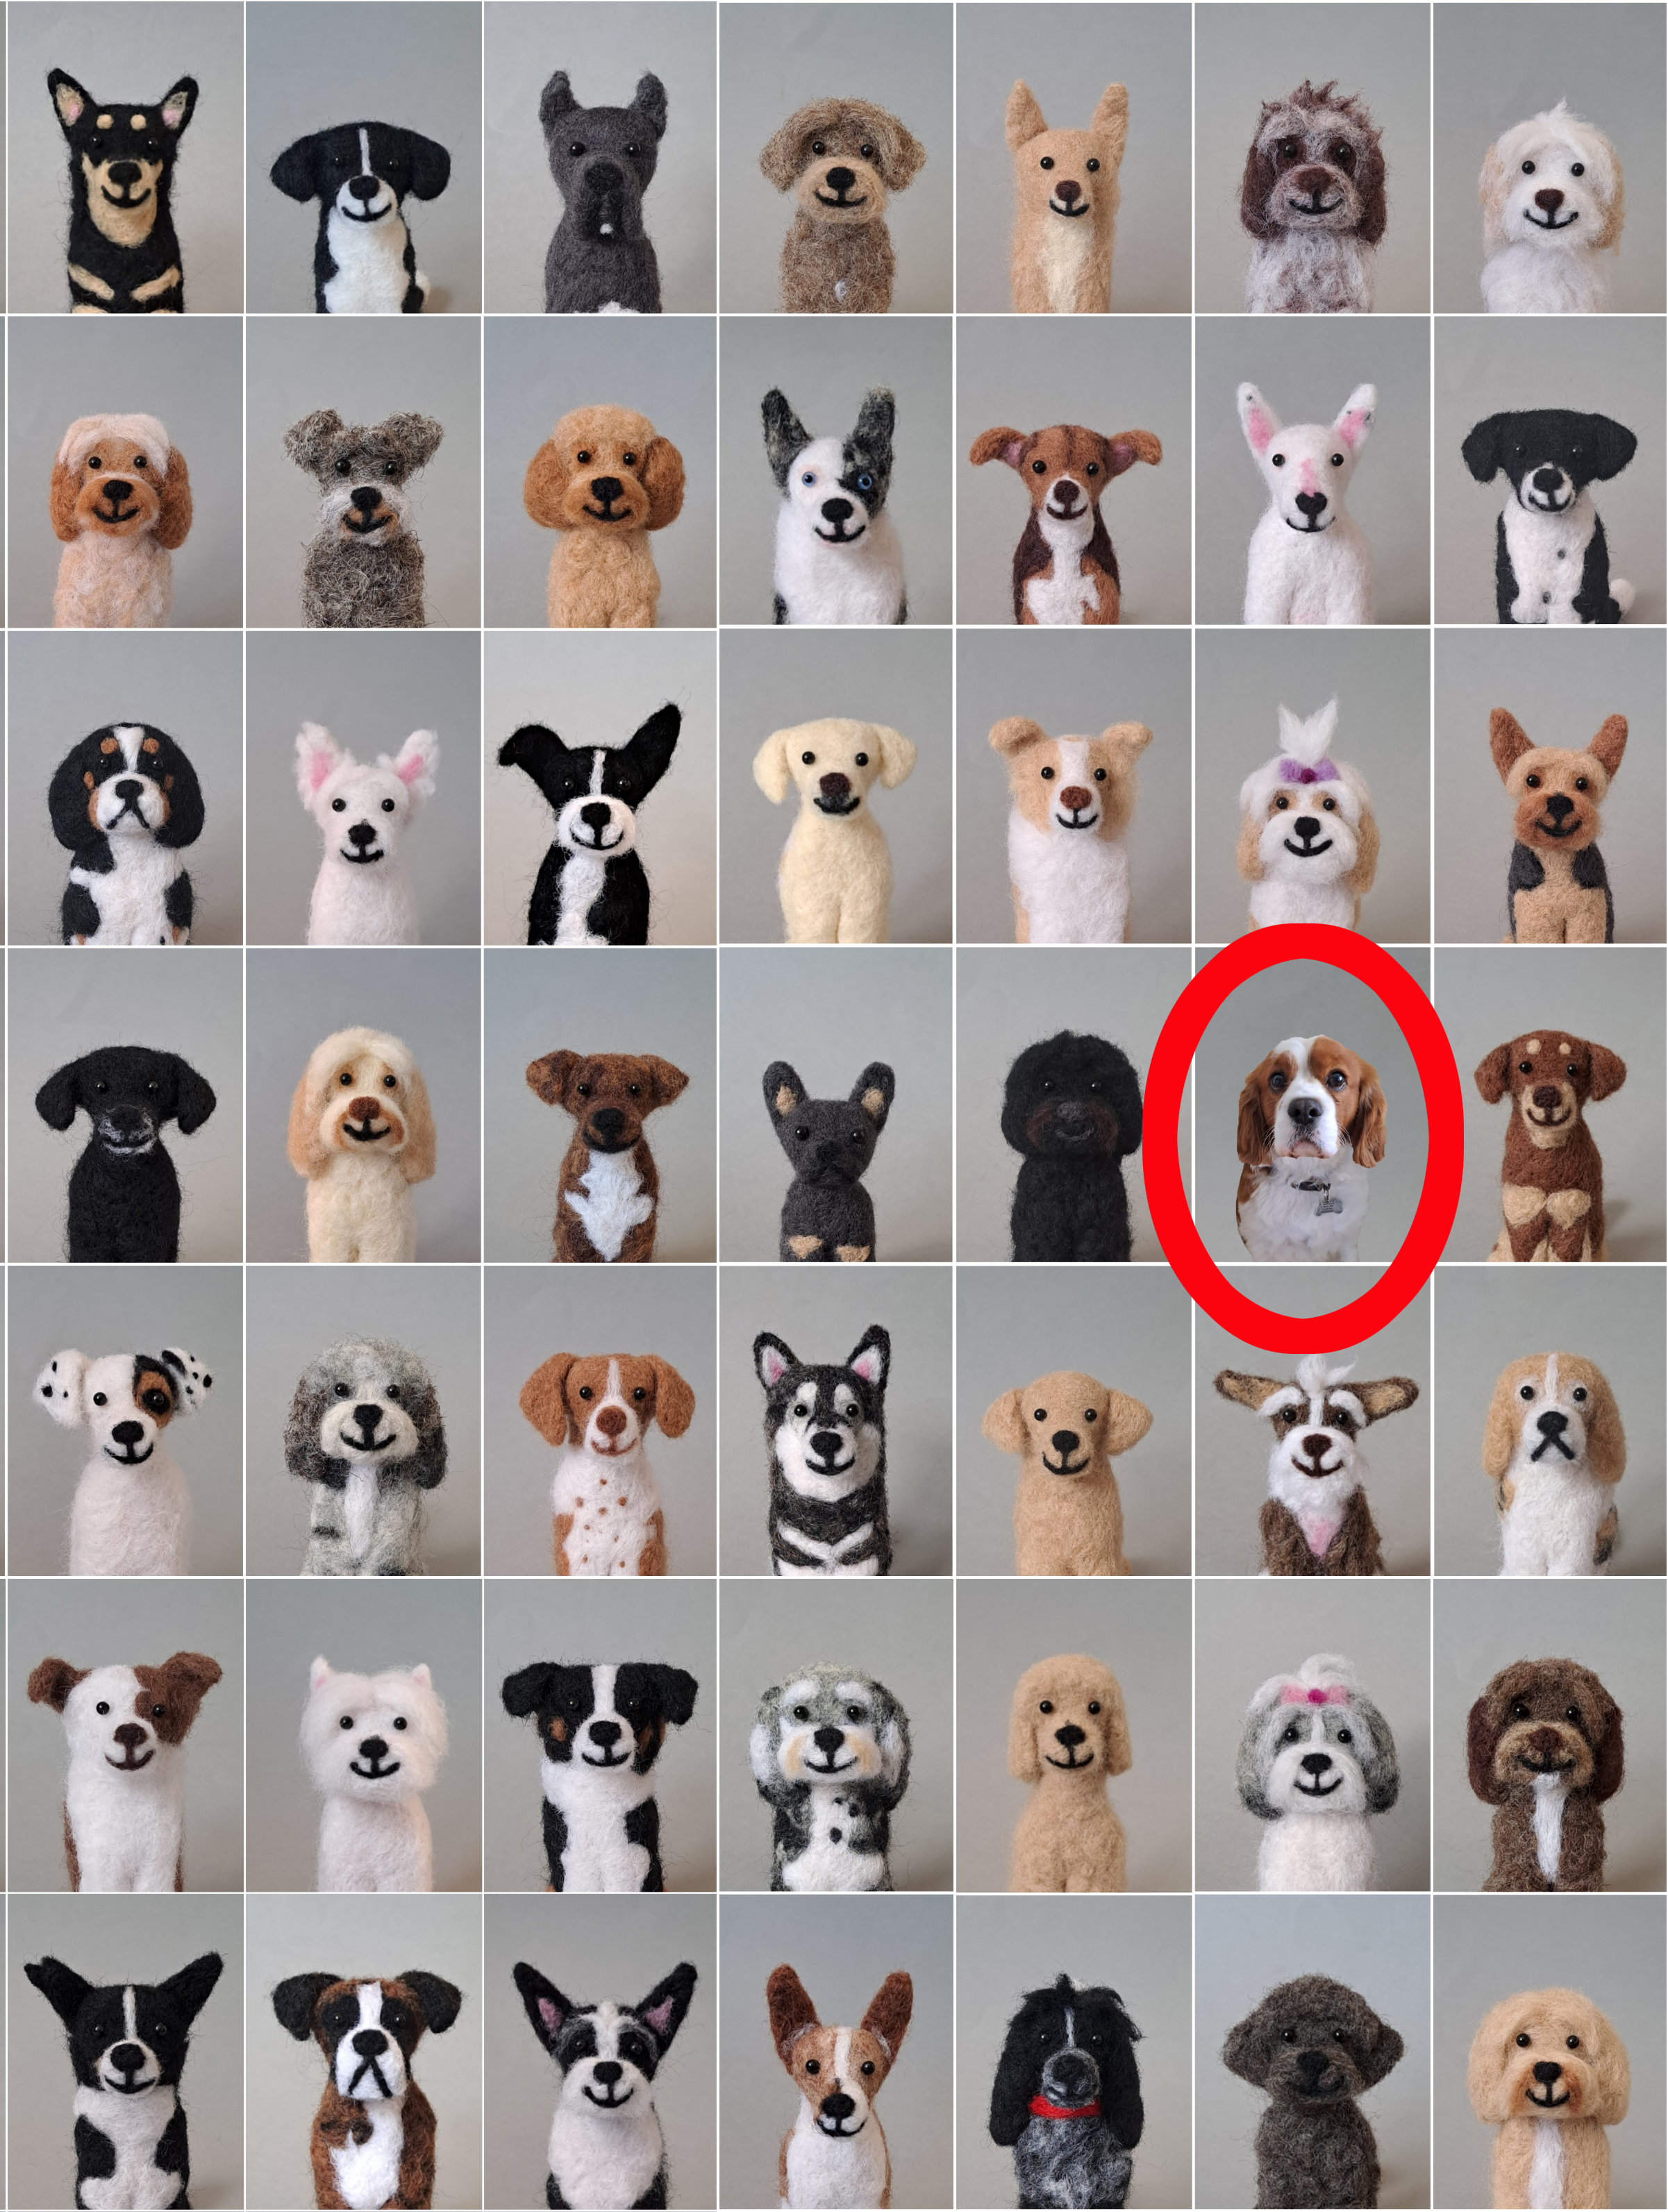 Optical illusion: which of these 49 dogs is real?